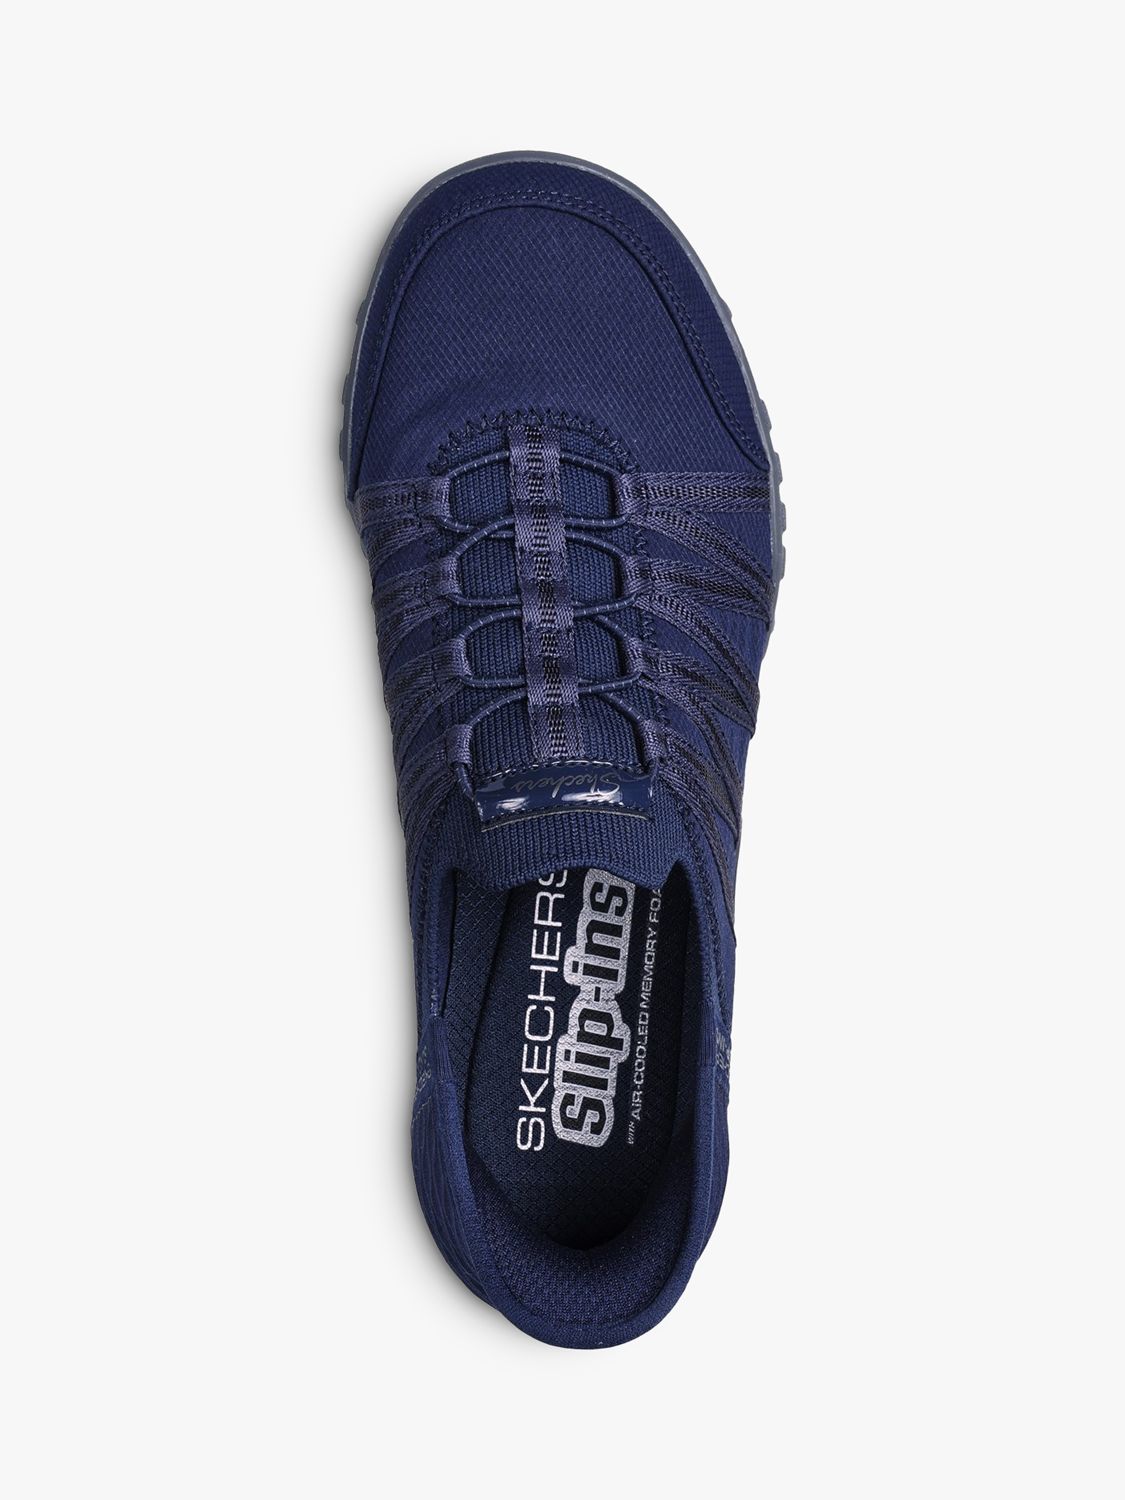 Skechers Squad SR Lace Up Trainers, Black at John Lewis & Partners